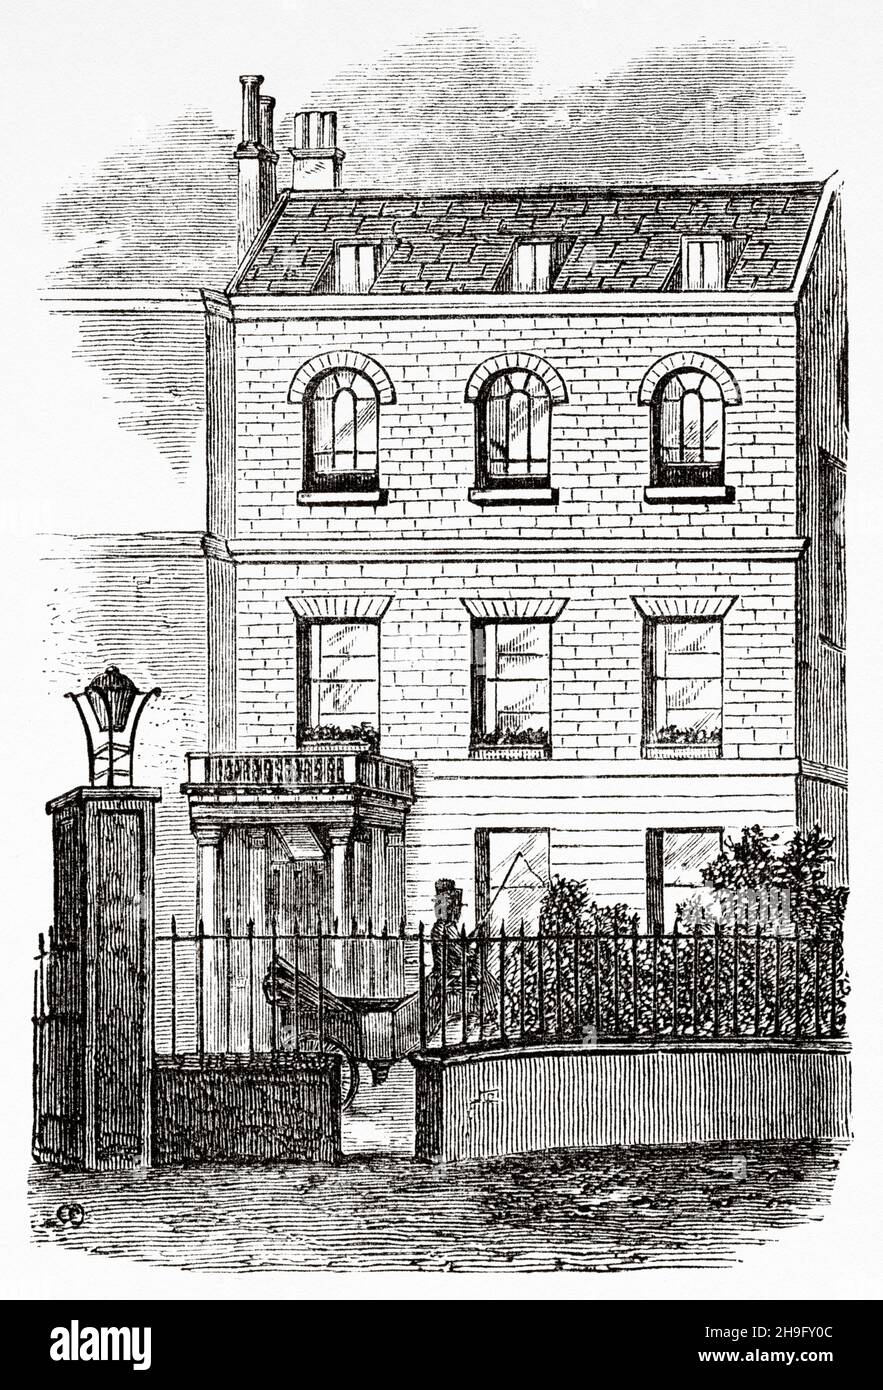 Tavistock House was the London home of Charles Dickens and his family from 1851 to 1860. At Tavistock House Dickens wrote Bleak House, Hard Times, Little Dorrit and A Tale of Two Cities. Illustration from the Charles Dickens novel Little Dorrit by Hablot Knight Browne (1815-1882) English artist known as Phiz Stock Photo